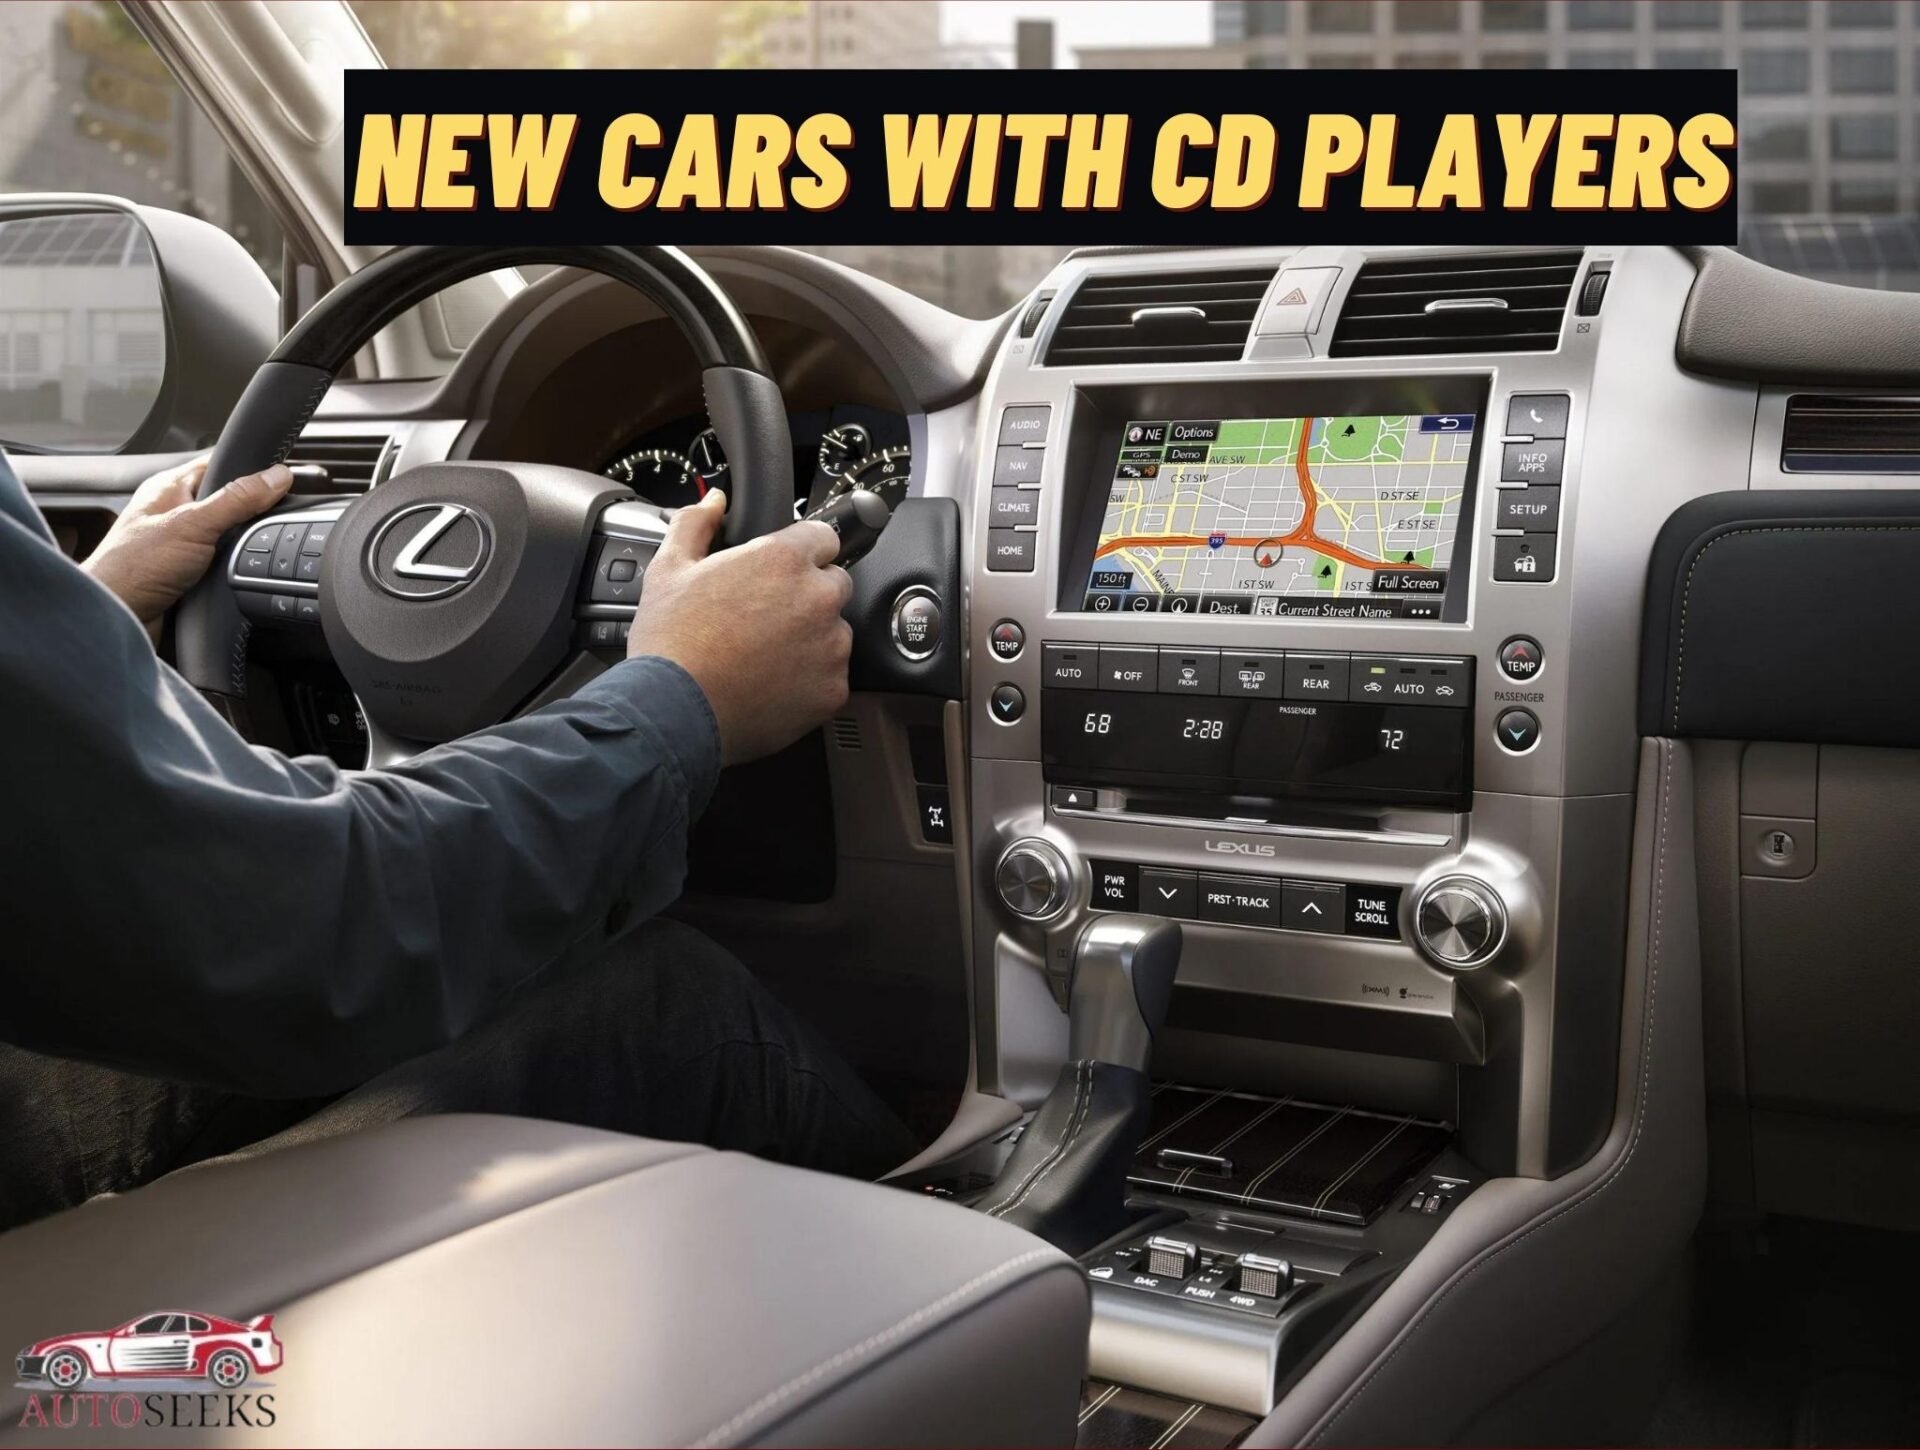 The Top 9 MustSee New Cars with CD Players for Music Lovers